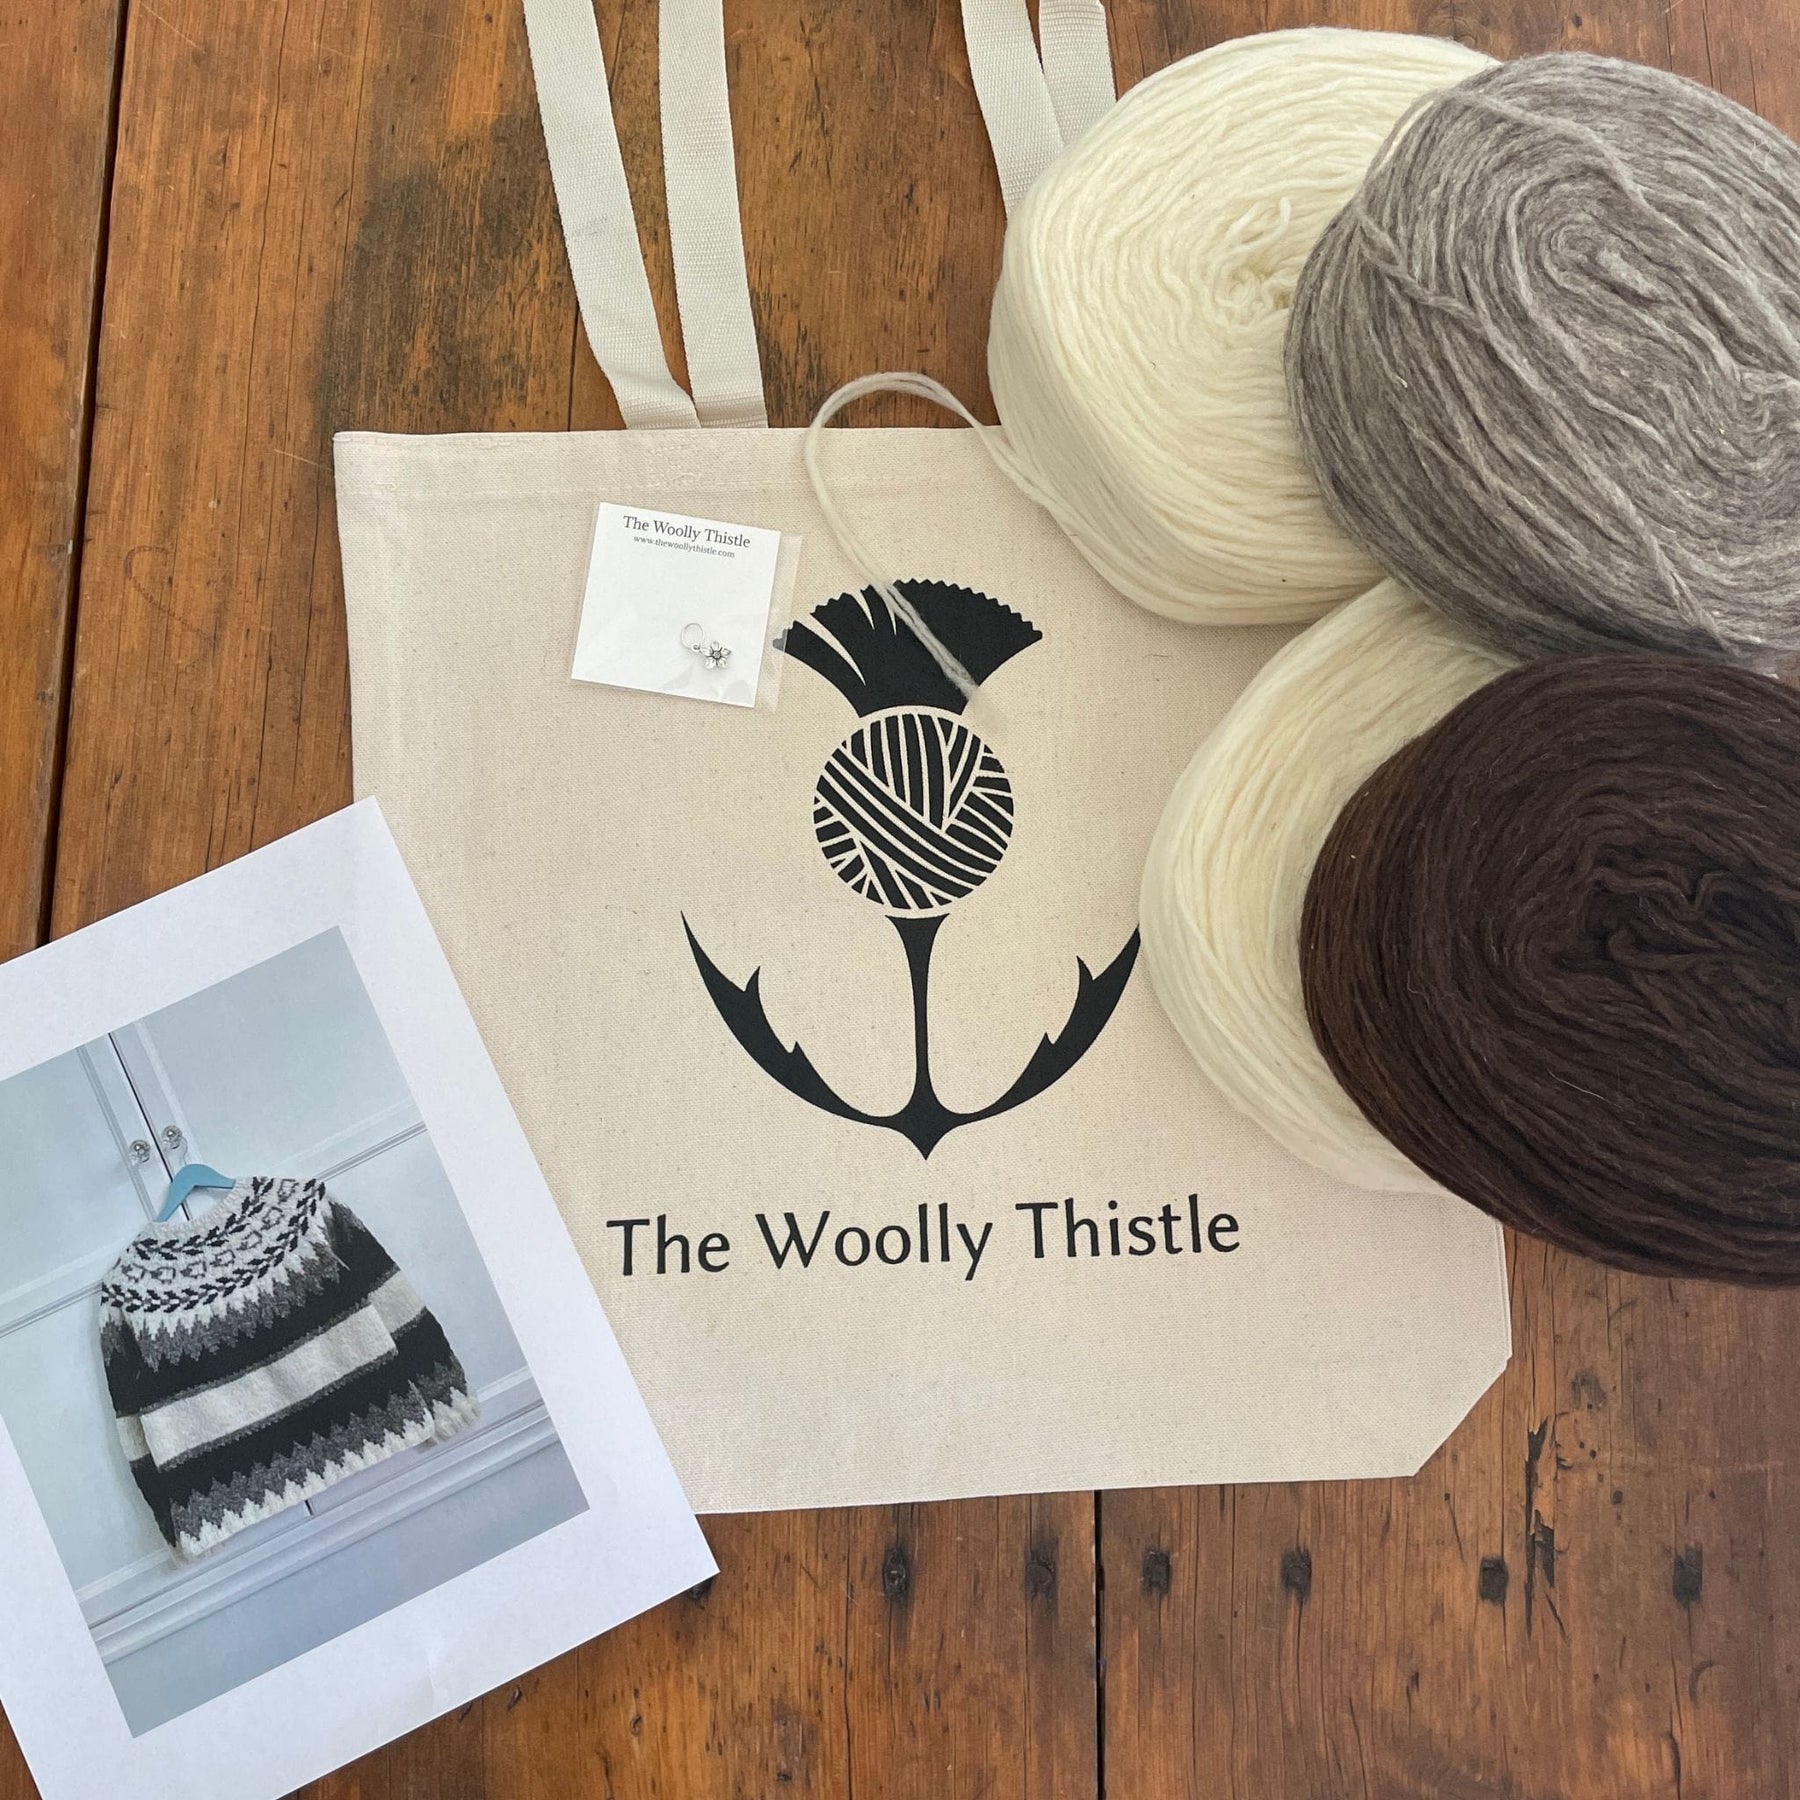 WoolDreamers Manchelopis Unspun Yarn – The Woolly Thistle